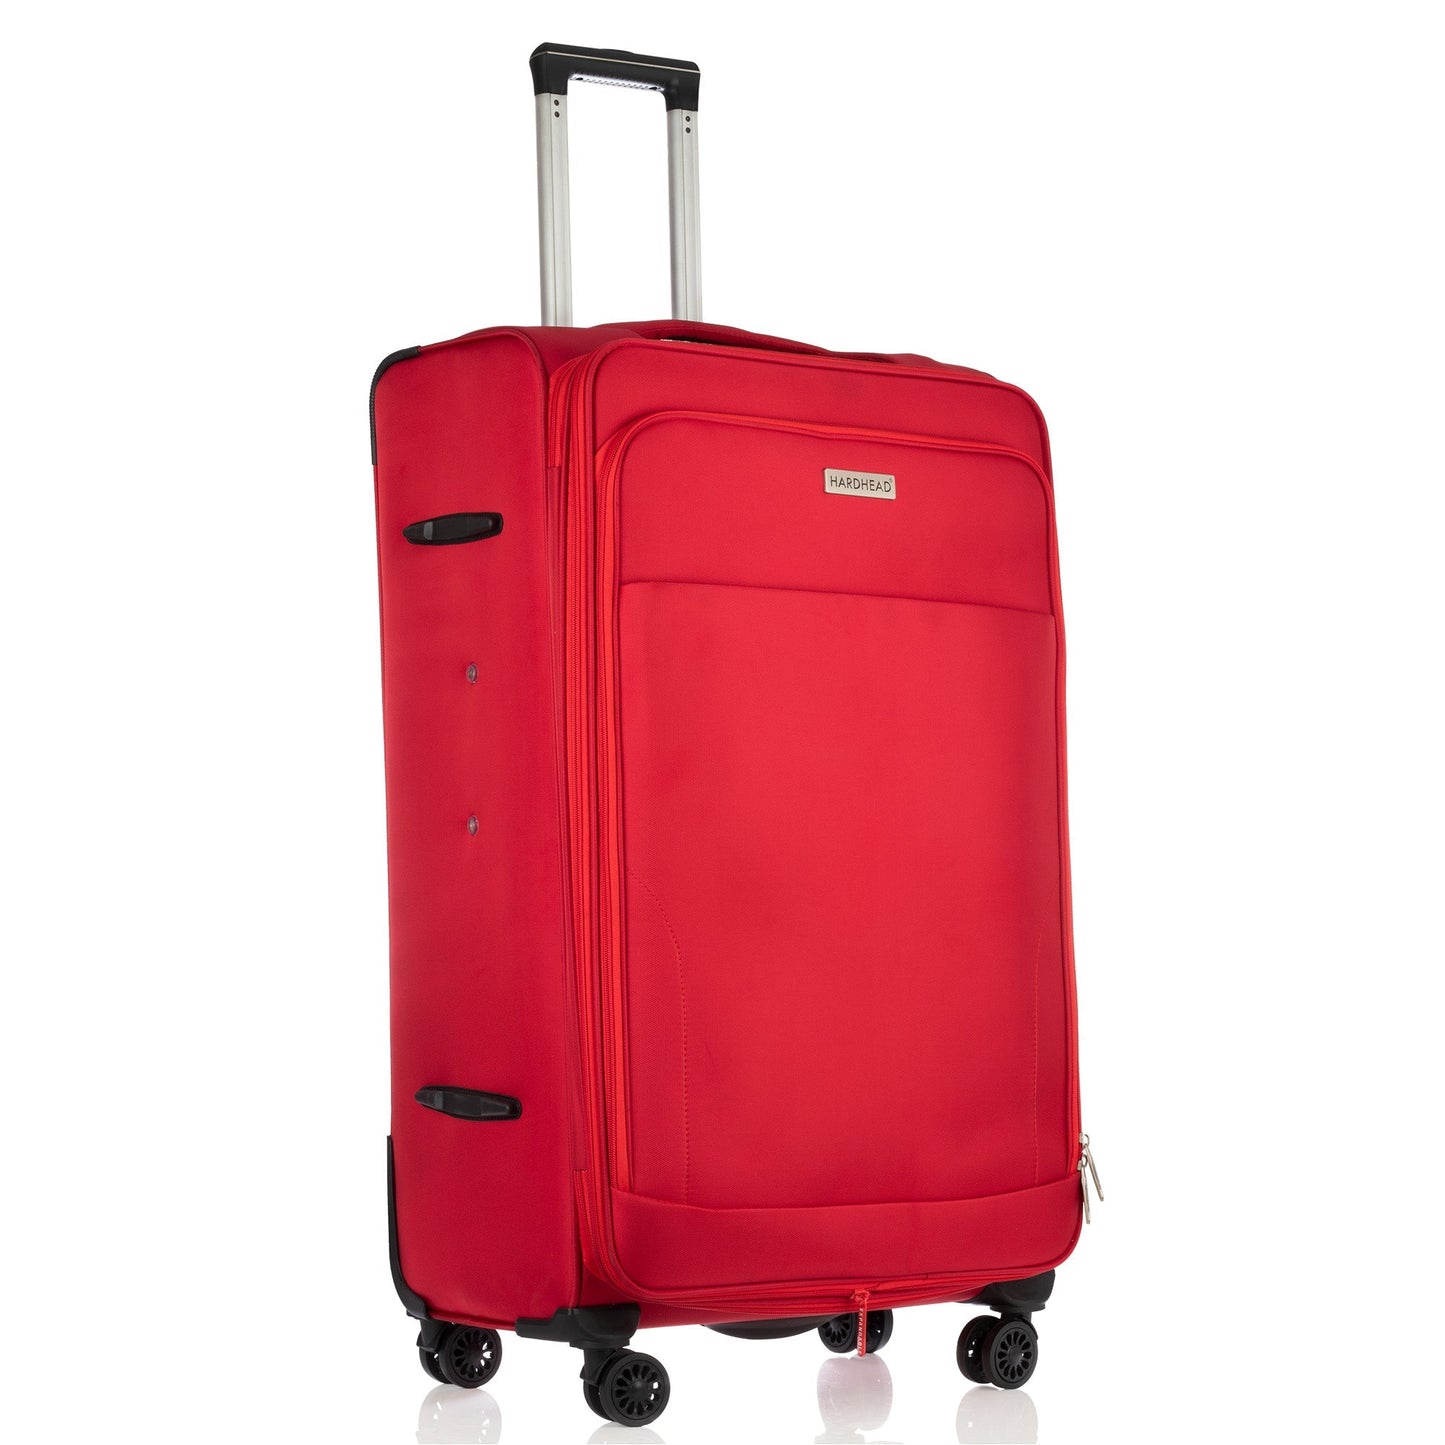 In Heaven Collection Red Luggage 4 Piece Set (18/20/26/30") Suitcase Lock Spinner Soft